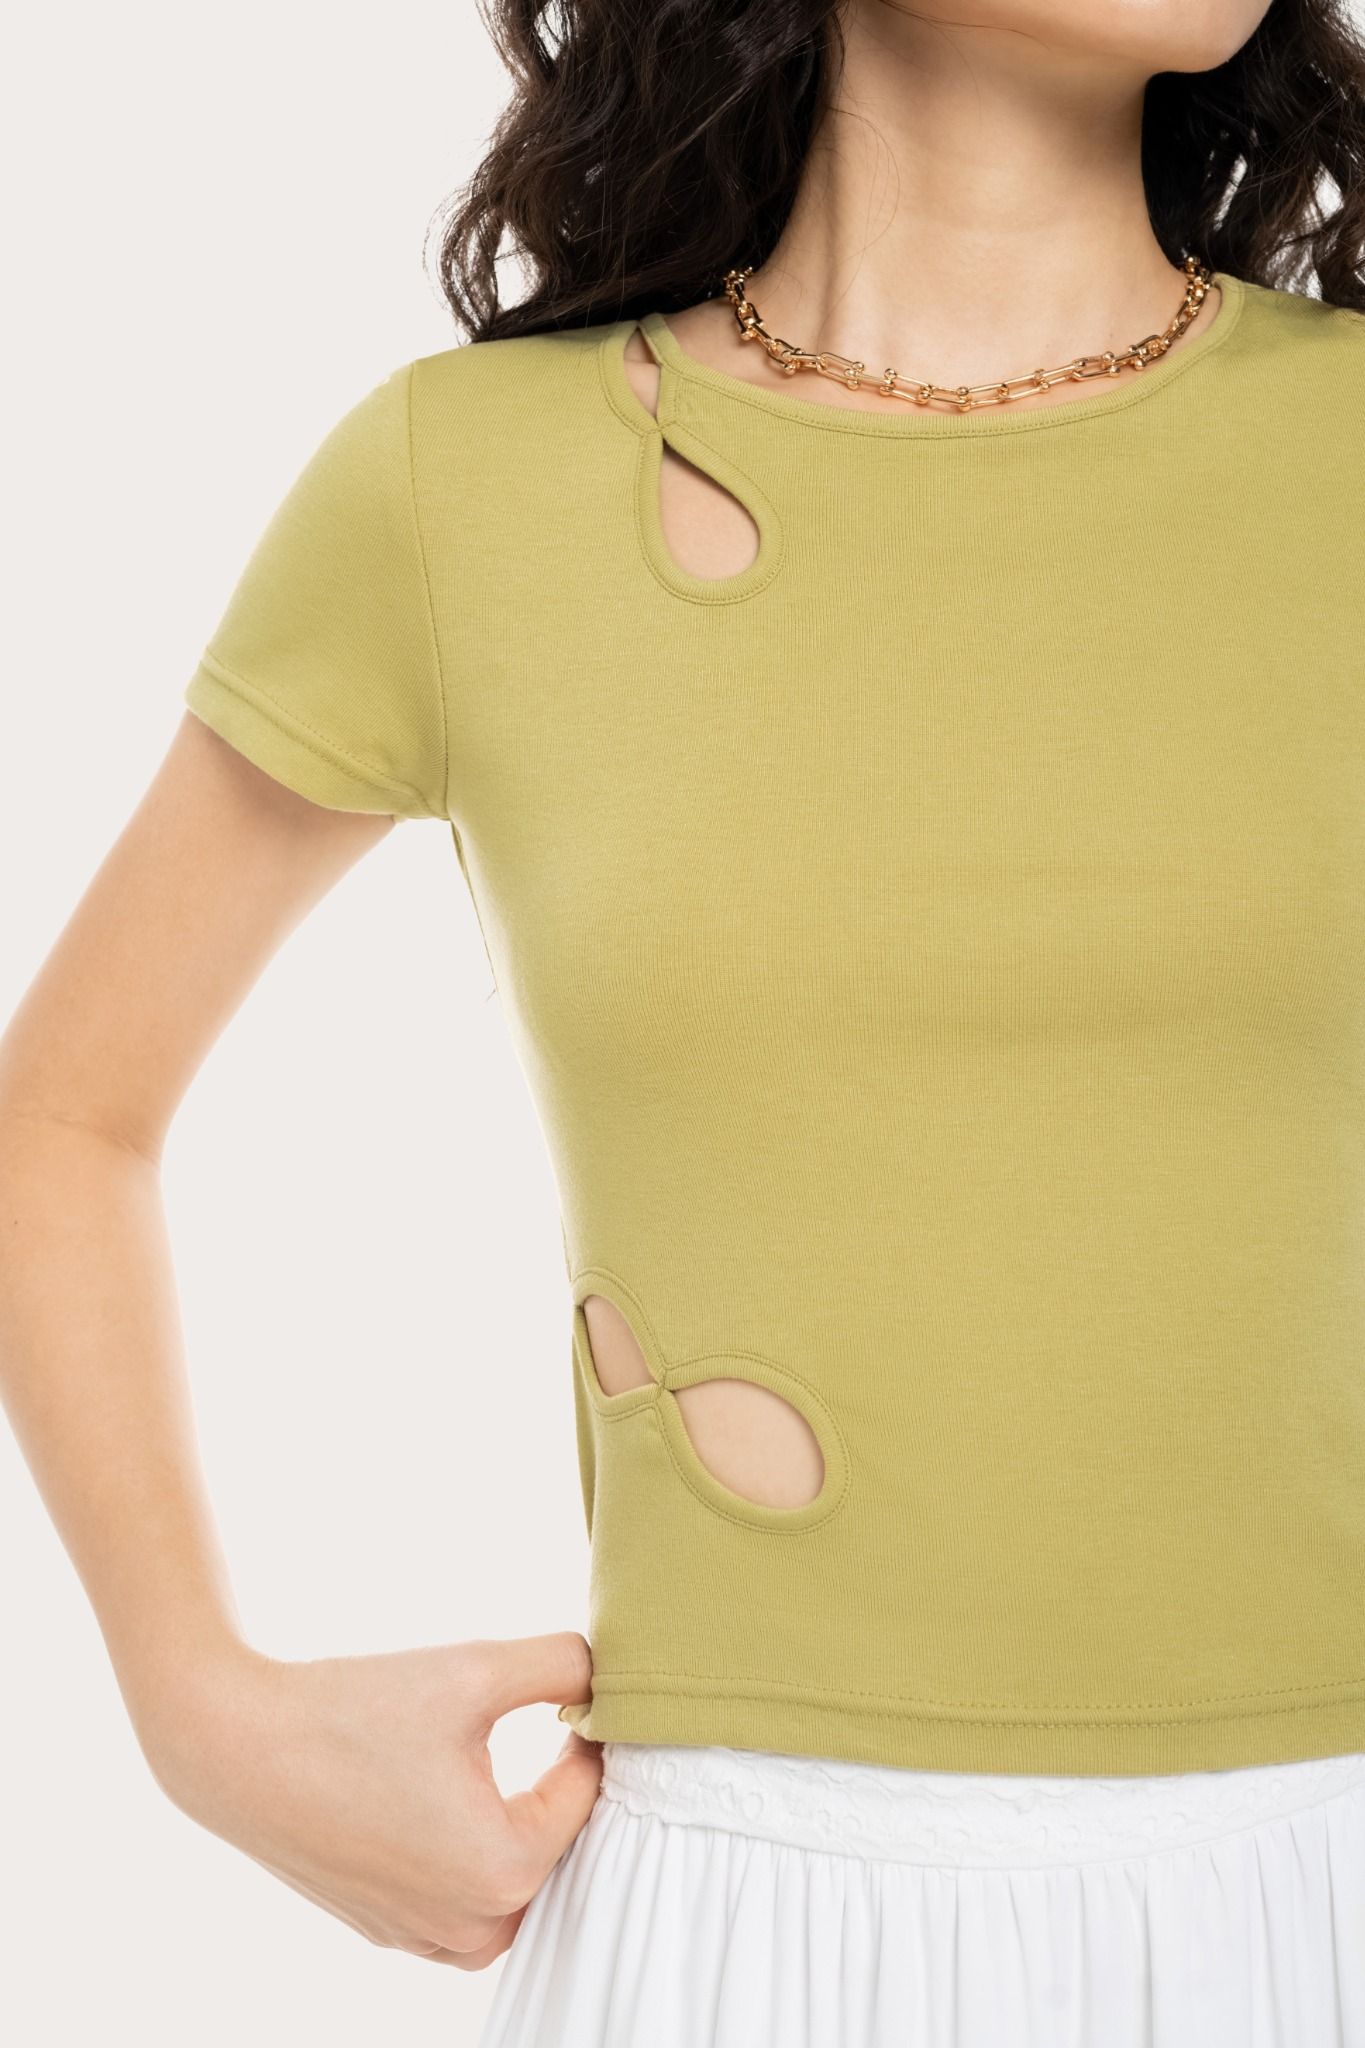  Olive Yellow Cut Out Top 